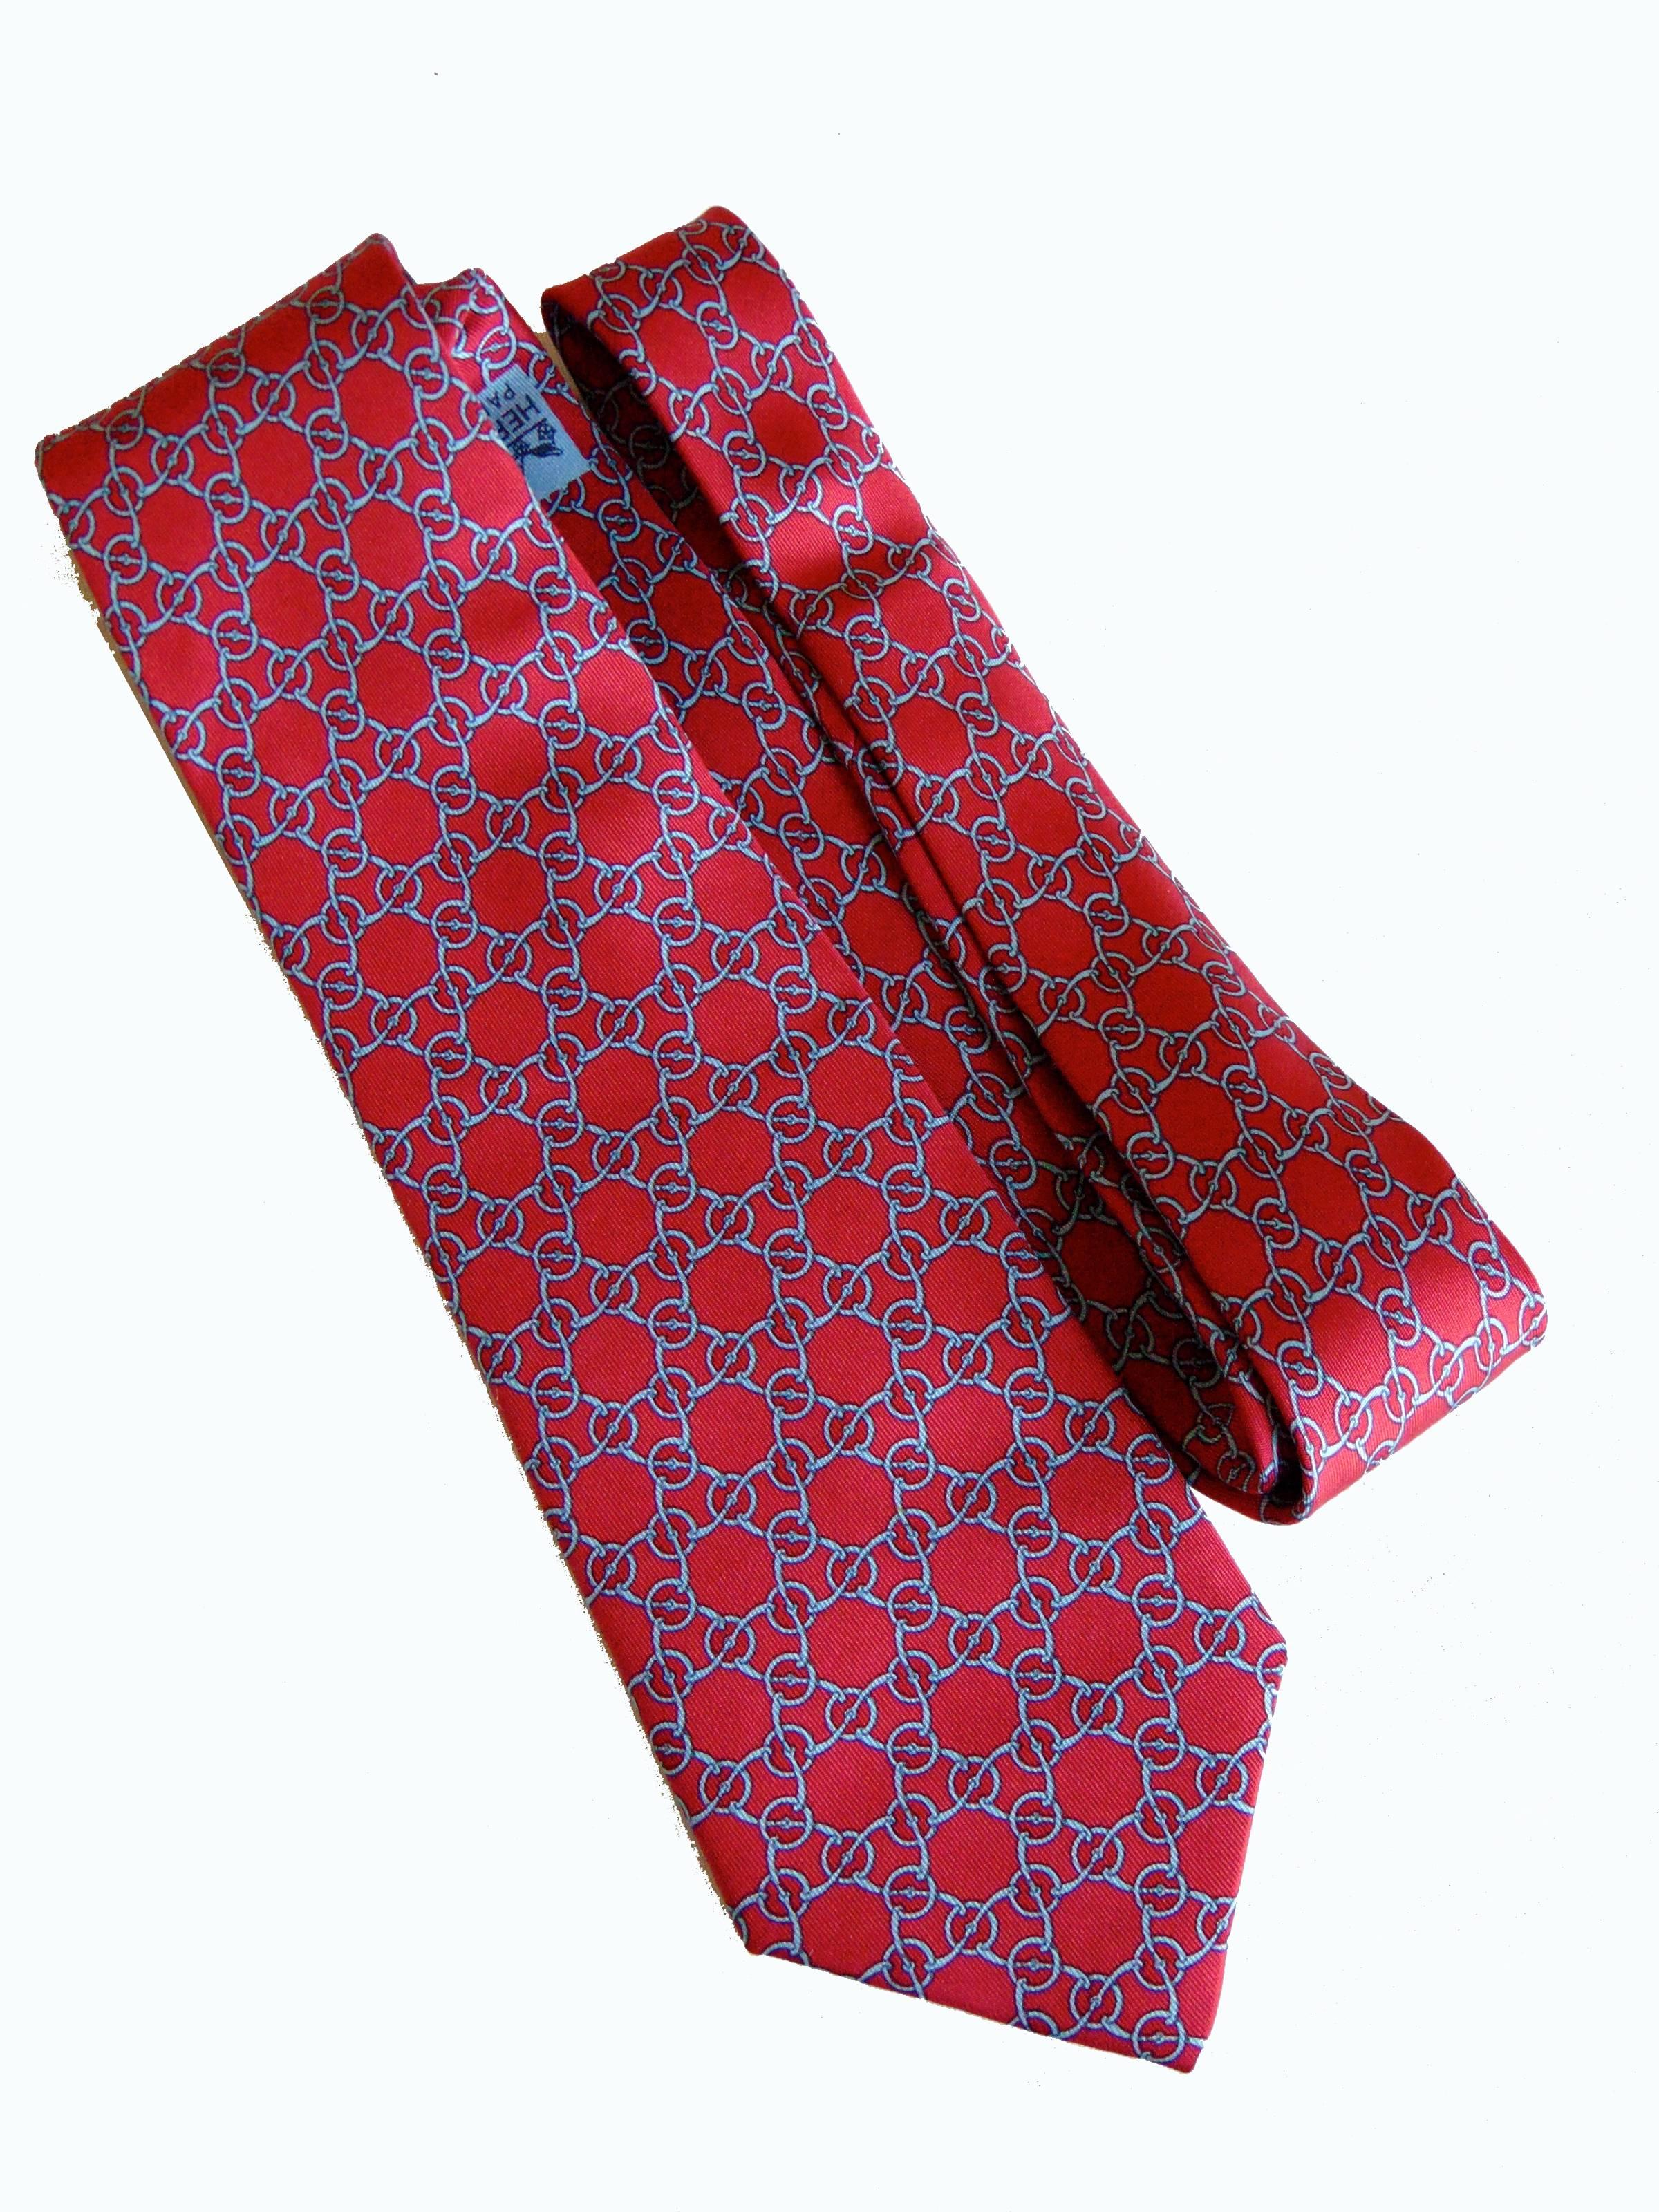 Authentic Hermes Mens Silk Necktie 7086 OA - Brick Red Snaffle Horse Bits
In excellent condition.  Measures 55